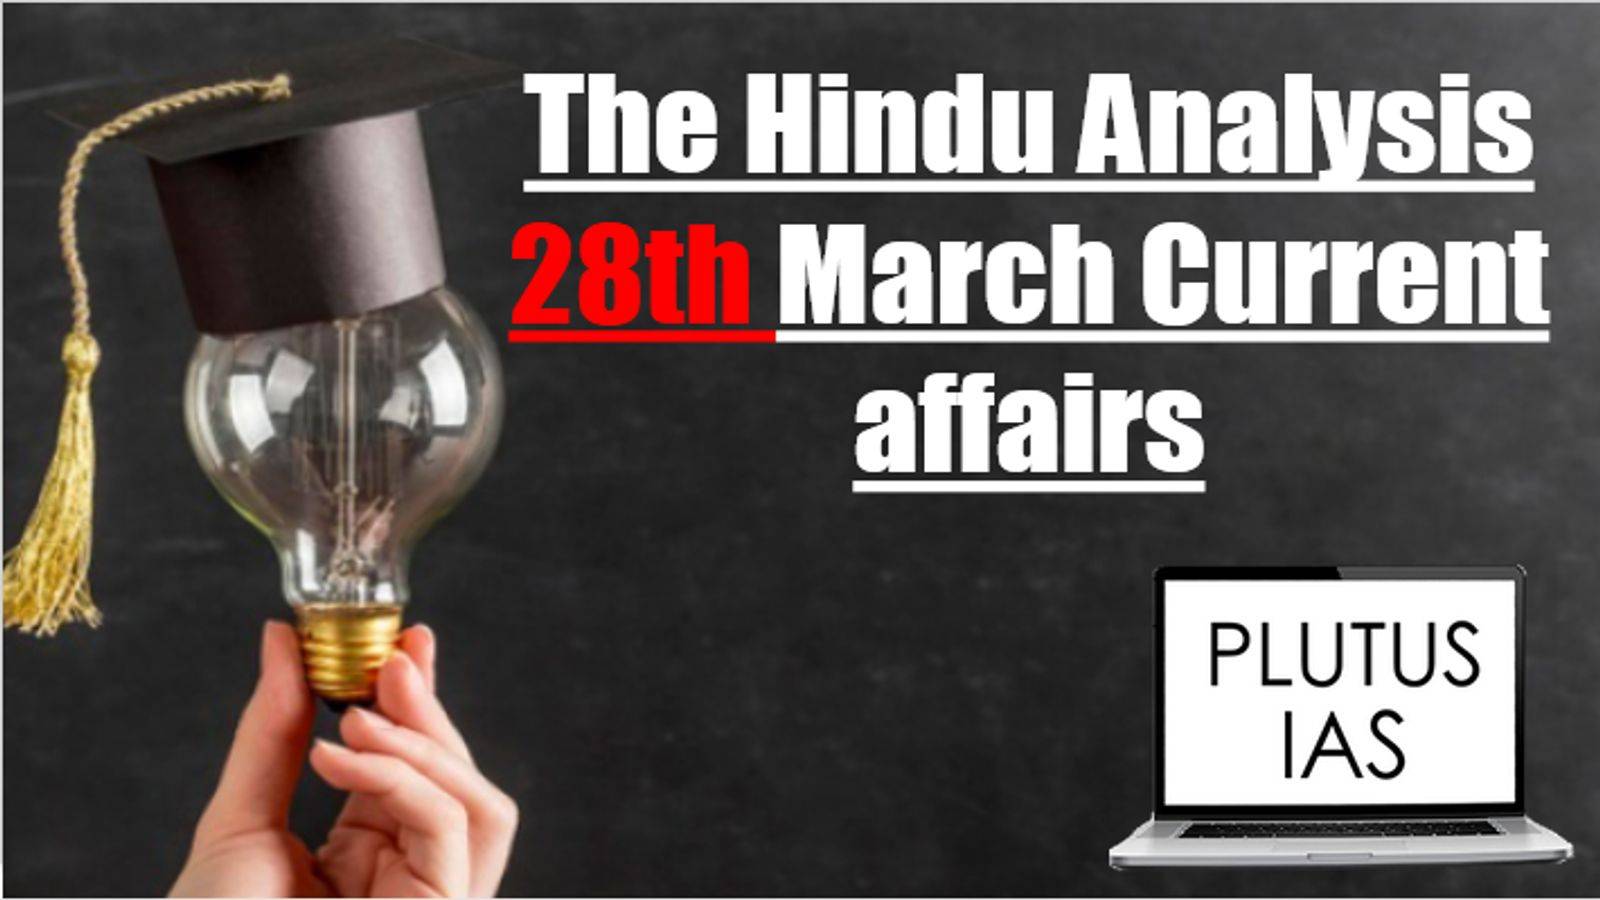 The Hindu Analysis 28 March Current Affairs